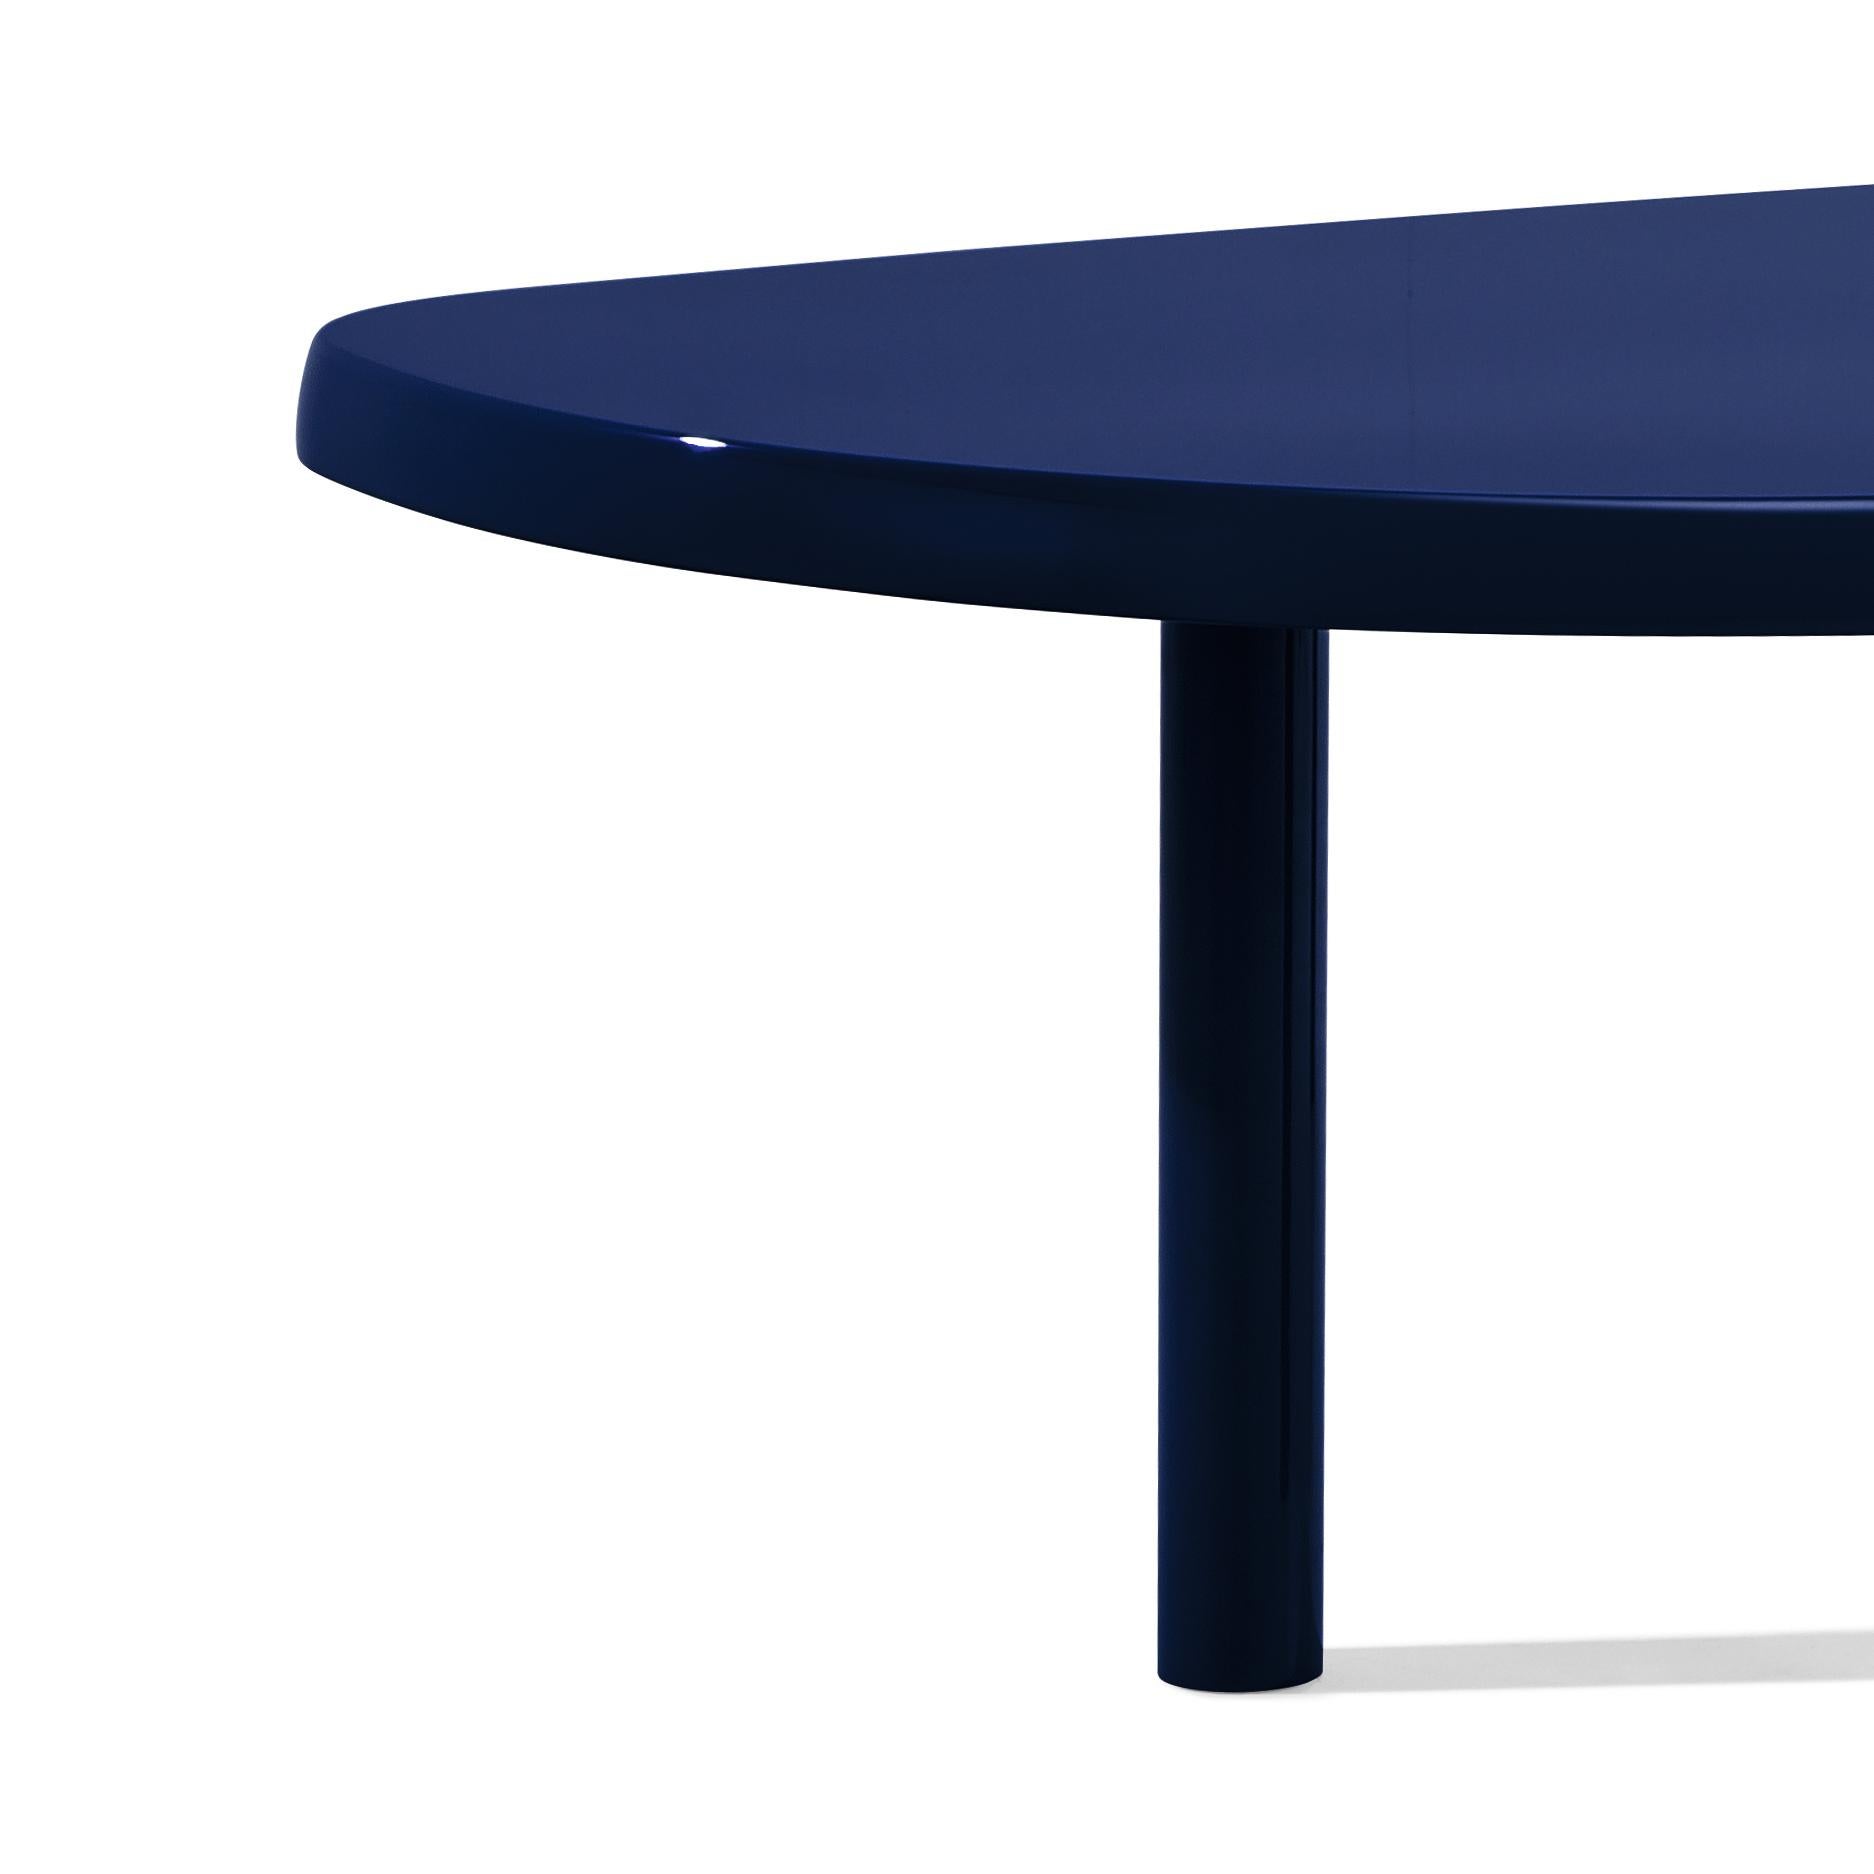 Forme libre table in night blue color designed by Charlotte Perriand in 1959. Relaunched by Cassina in 2011.
Manufactured by Cassina in Italy.

Charlotte Perriand started work on the tables en forme libre in 1938. Originally intended for her own